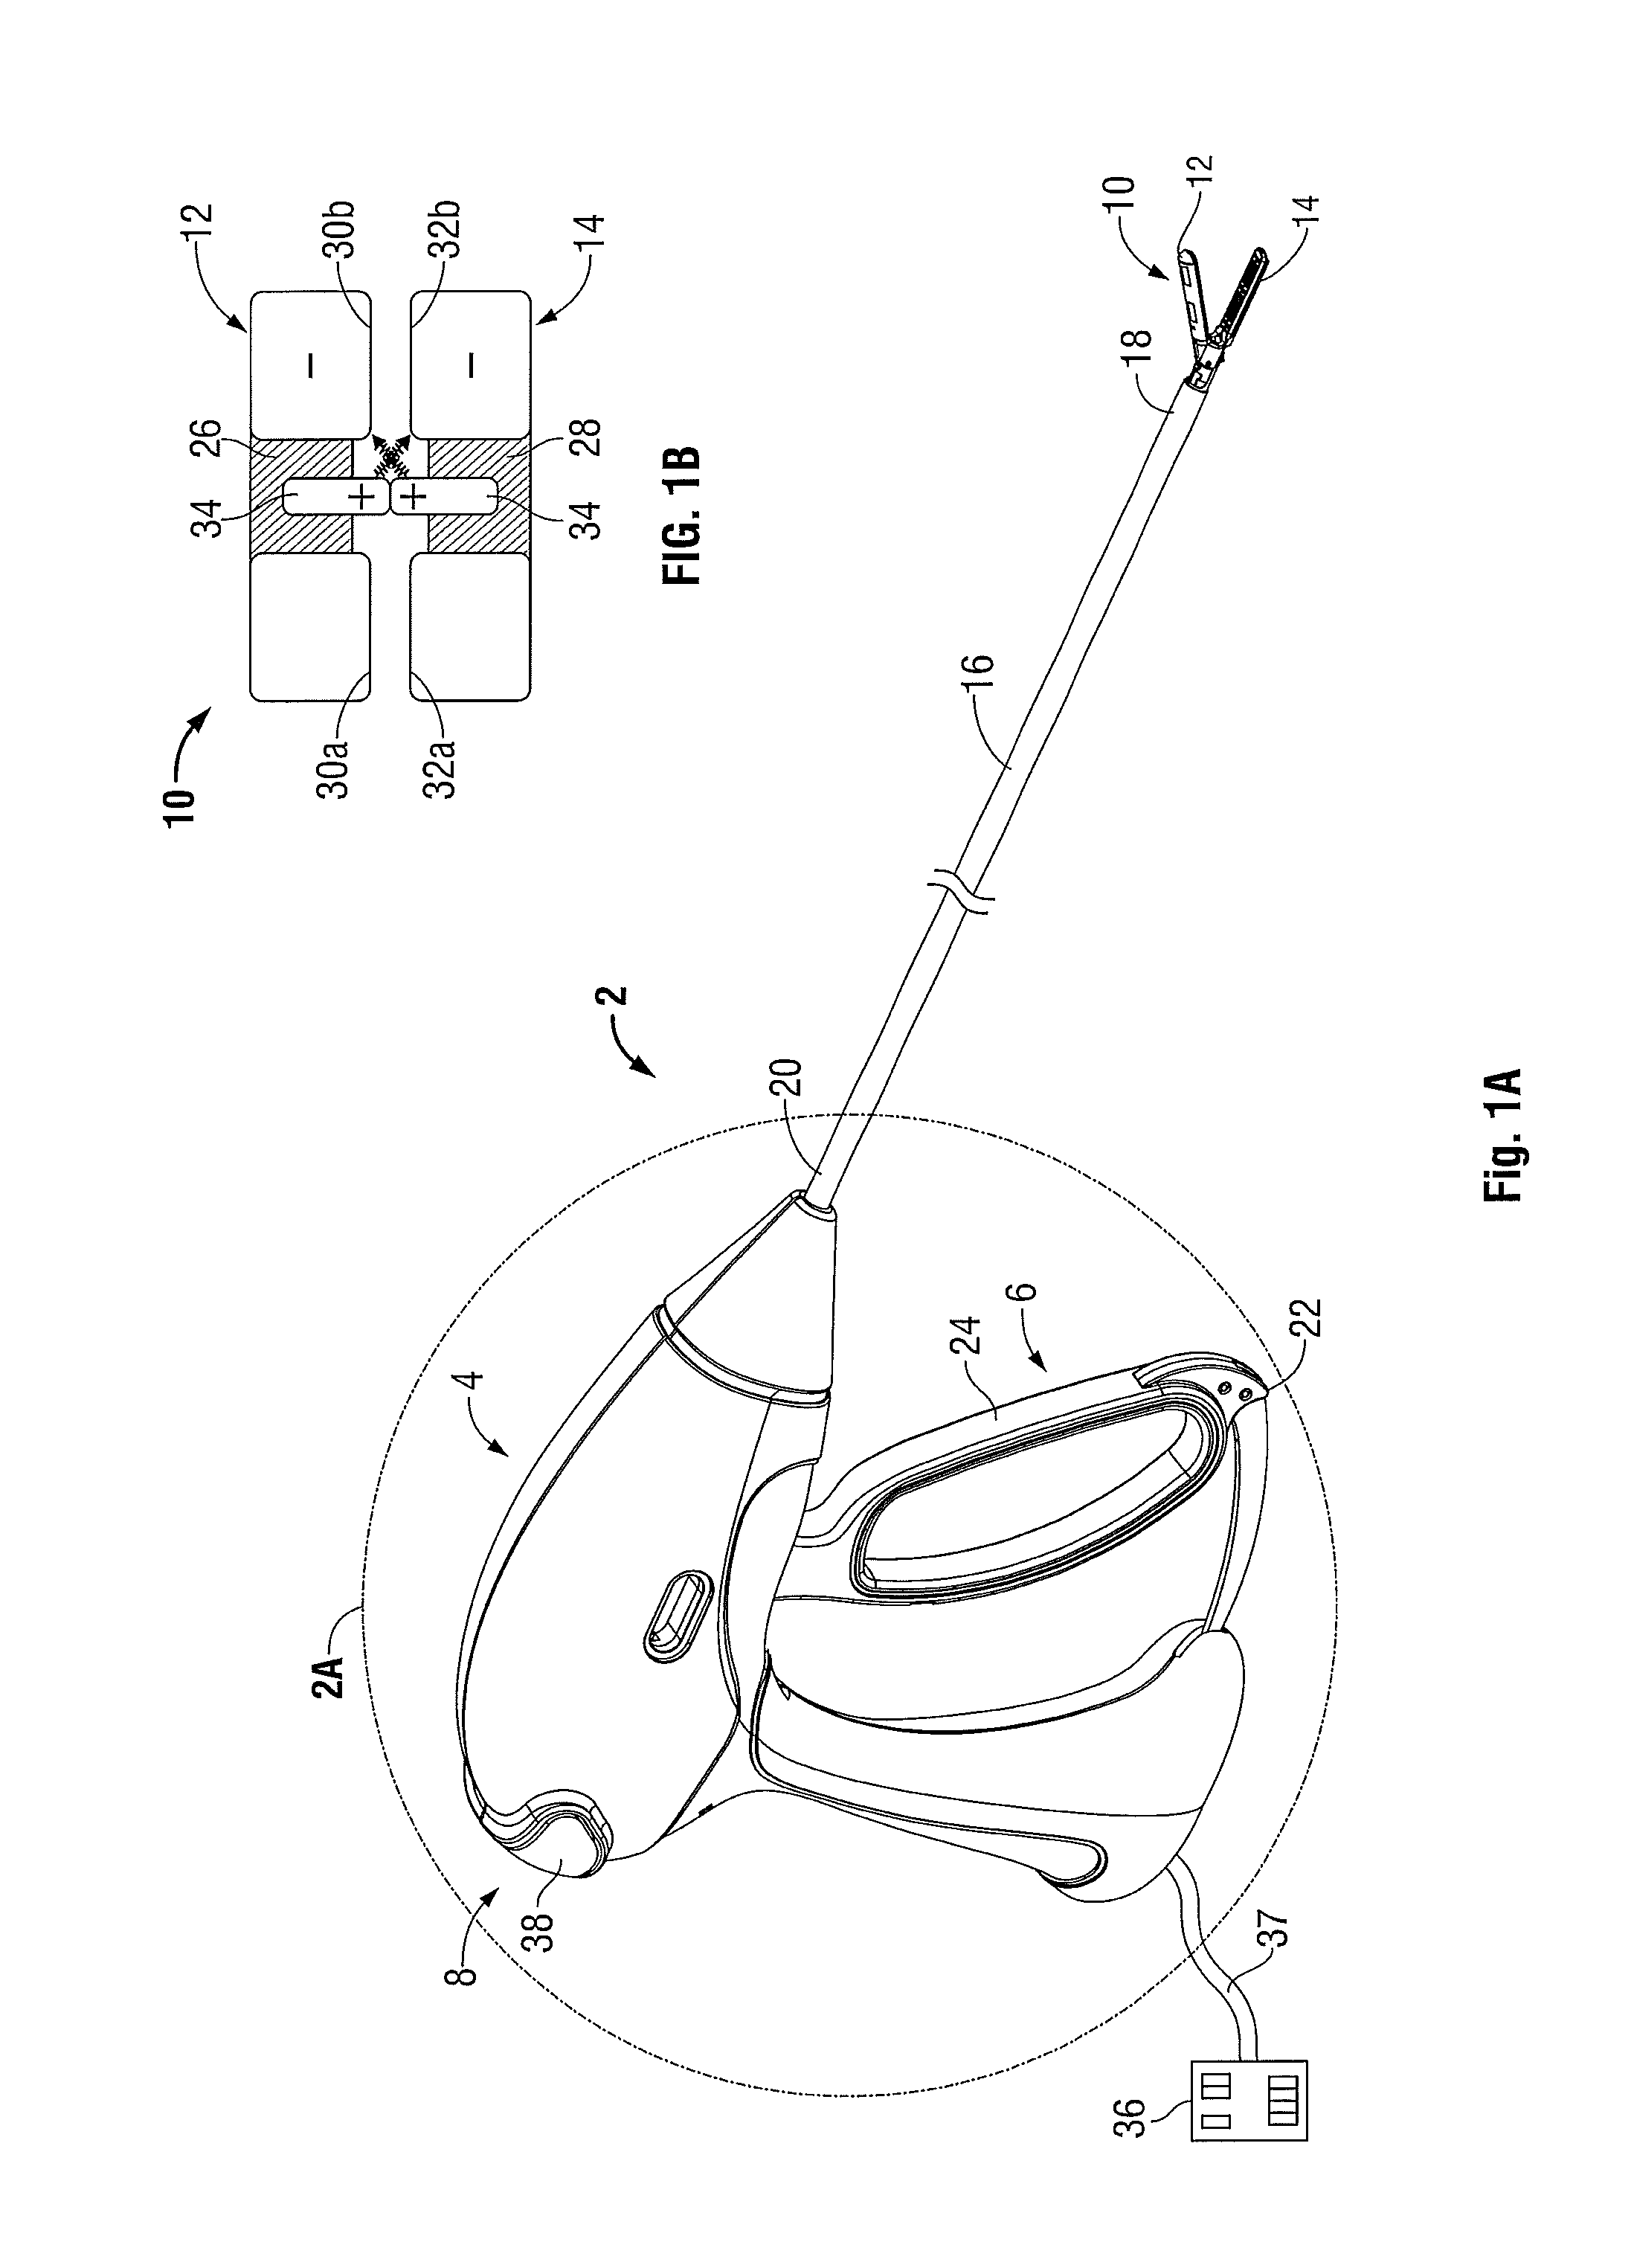 Apparatus for Activating an Electrosurgical Vessel Sealing Instrument Having an Electrical Cutting Mechanism